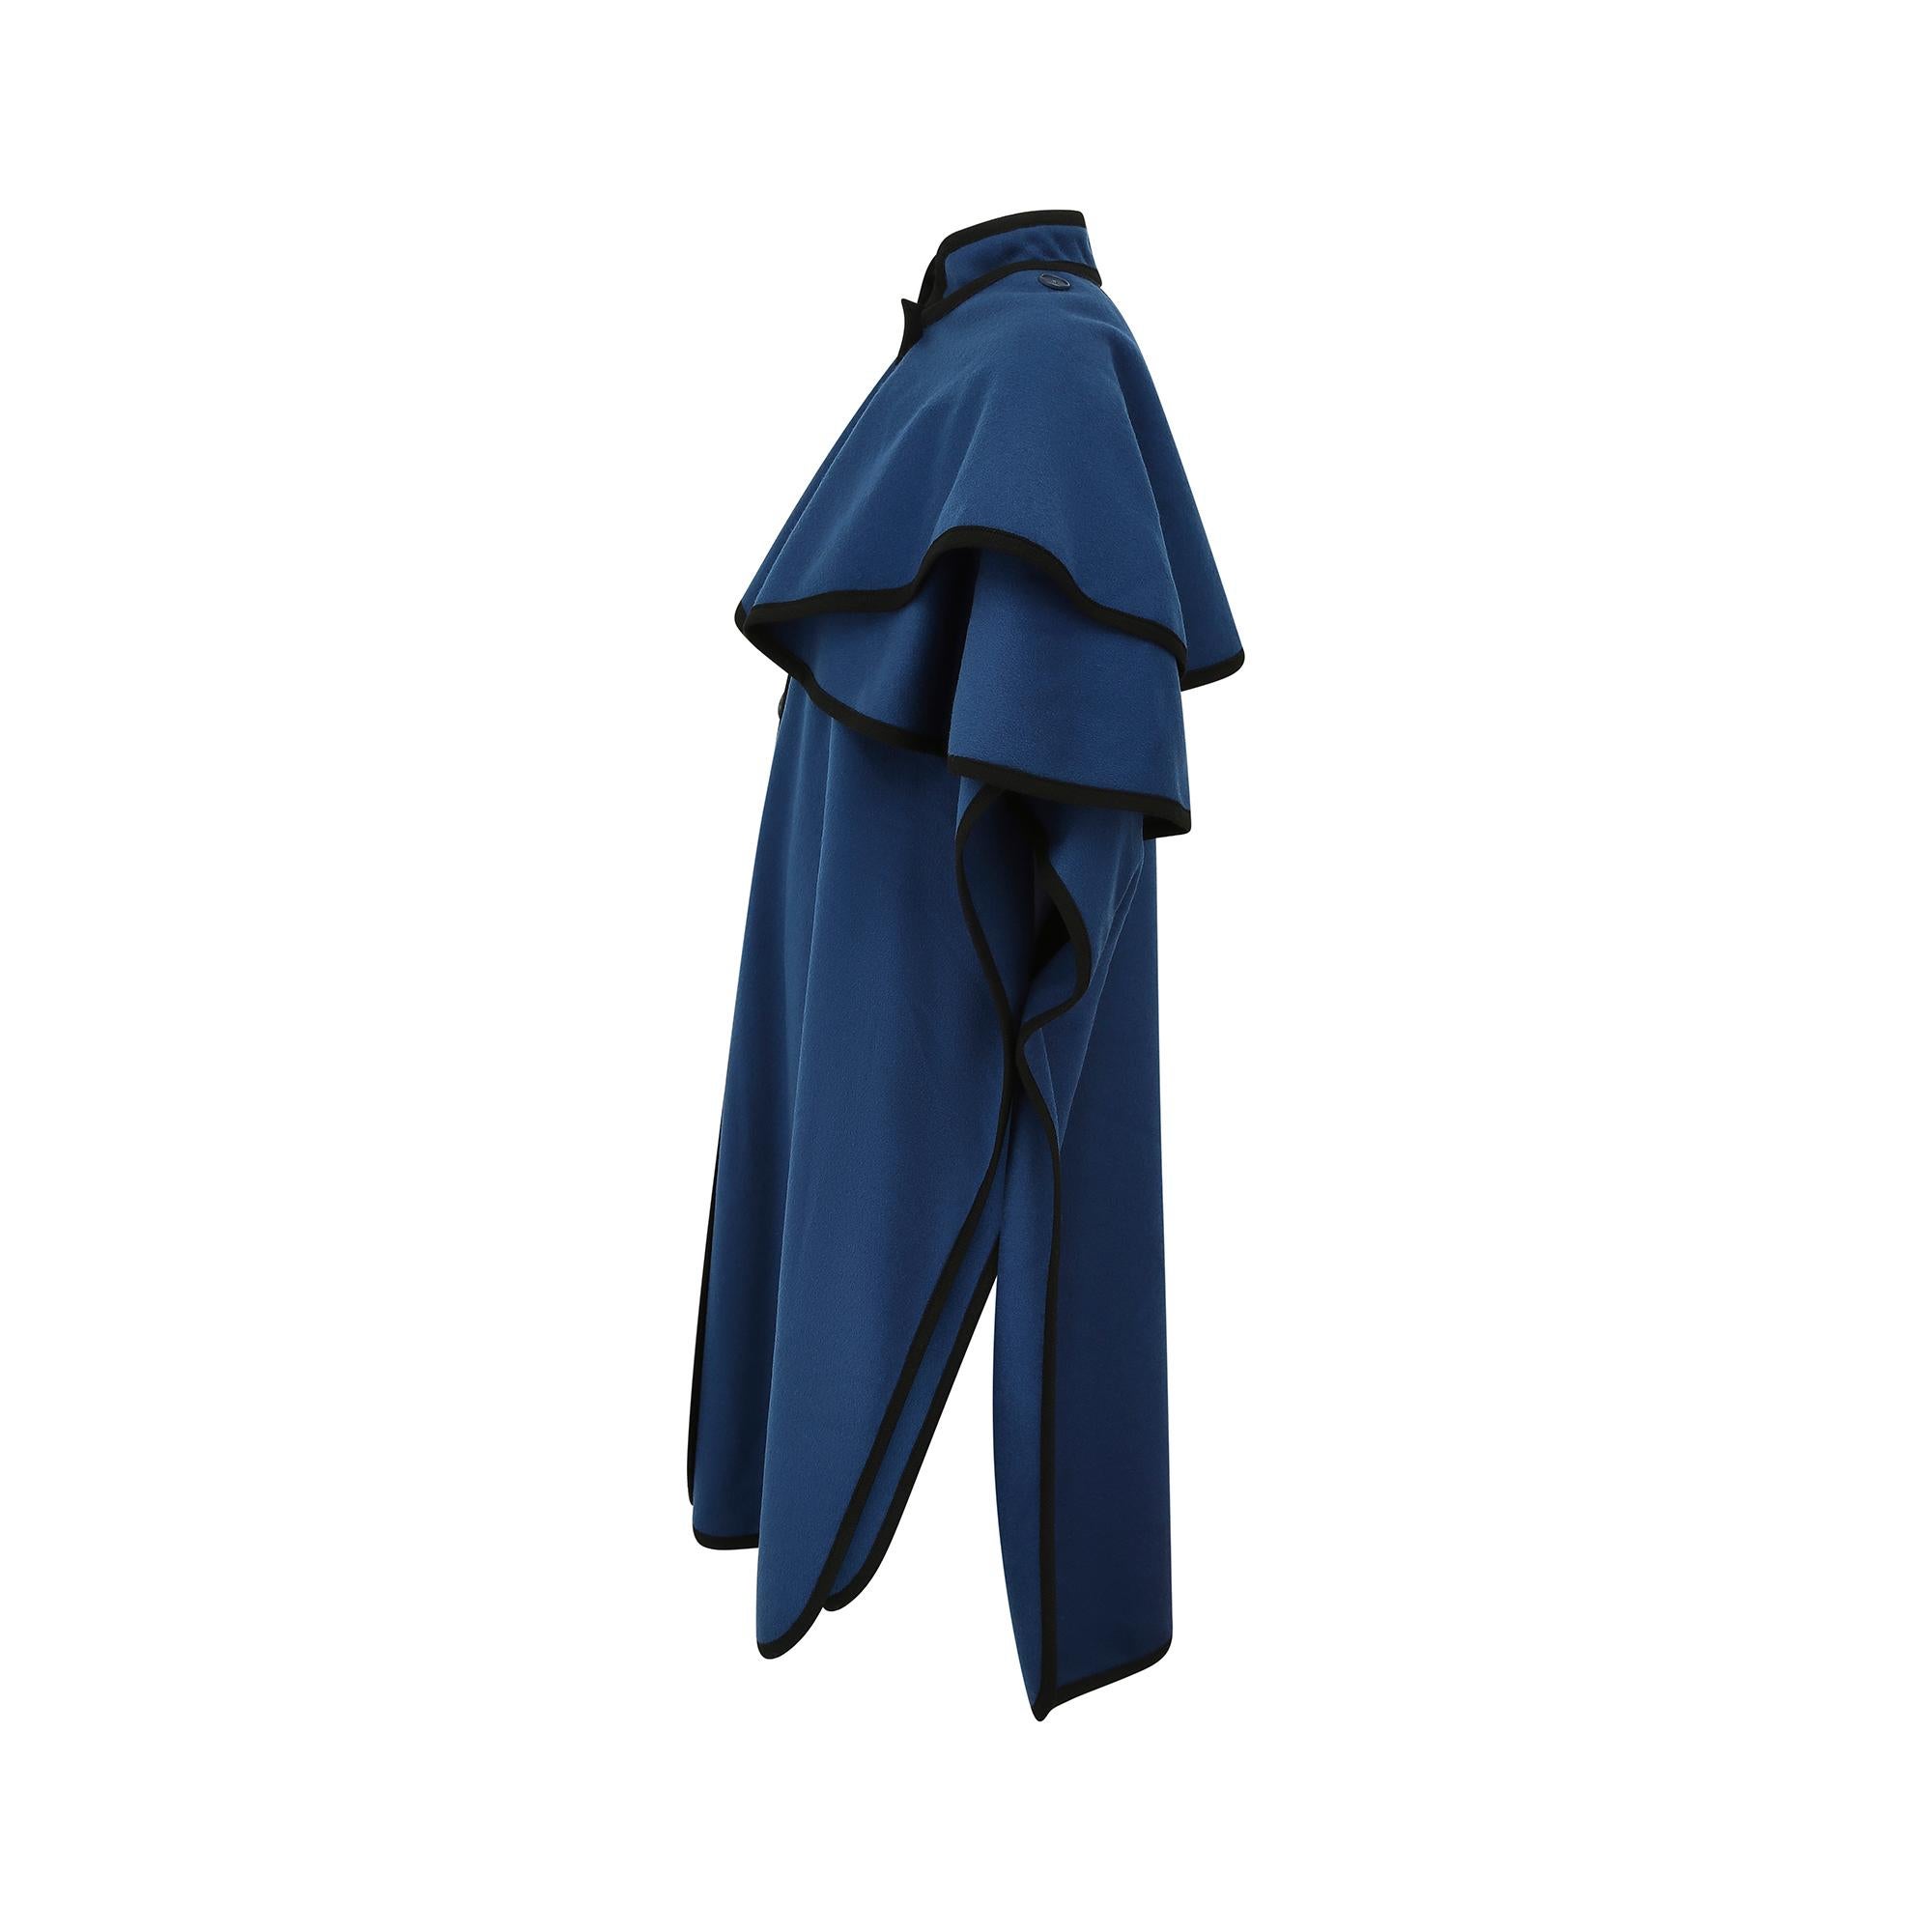 1976 Ballets Russes Yves Saint Laurent Peacock Blue Cape In Excellent Condition For Sale In London, GB